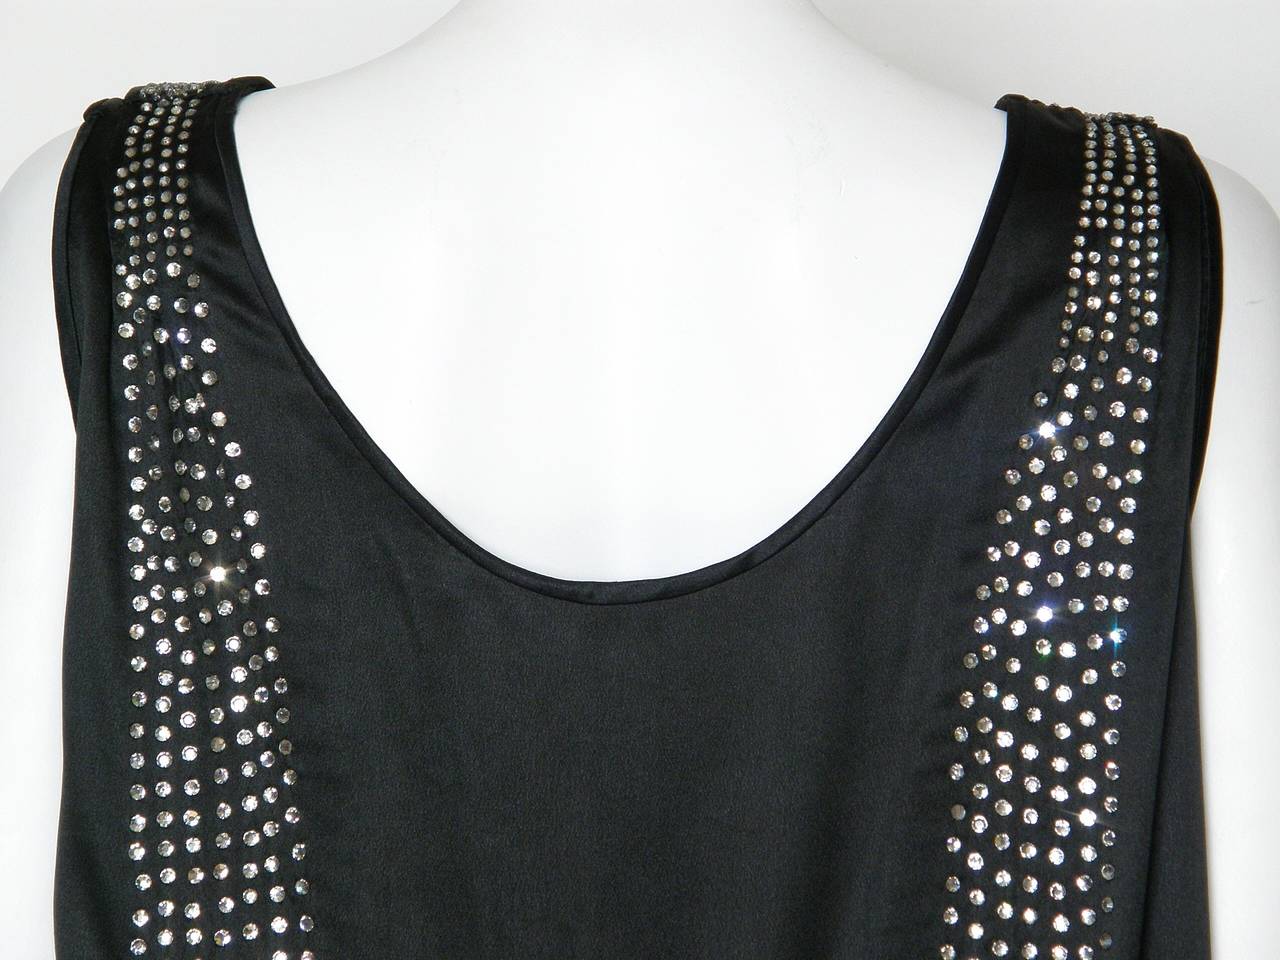 Black Satin Art Deco Style Evening Blouse with Rhinestones and Beading For Sale 1